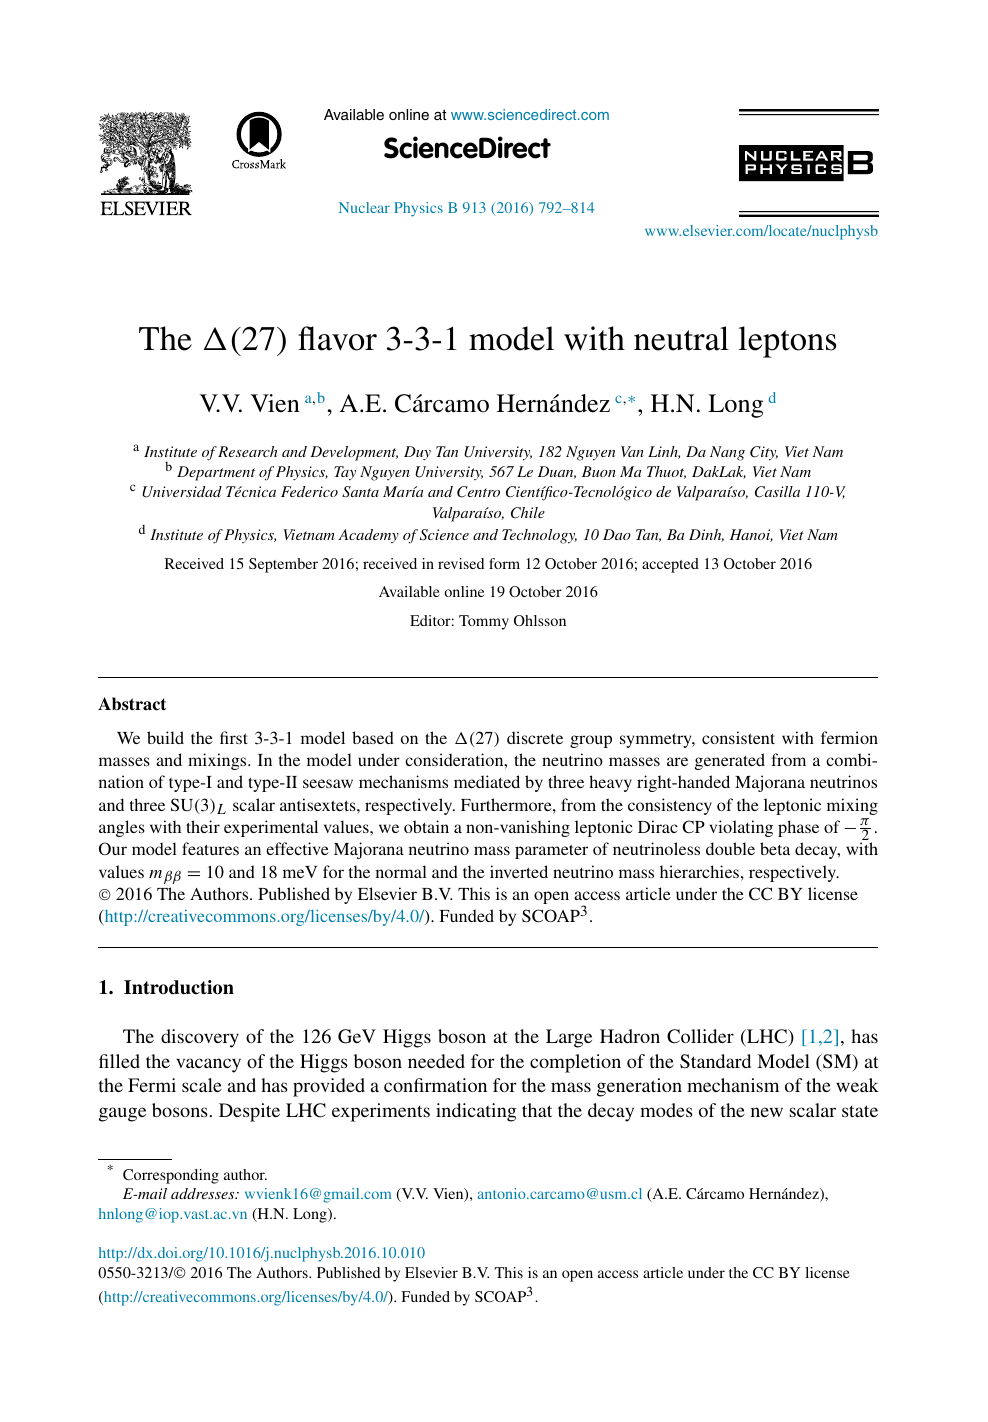 The D 27 Flavor 3 3 1 Model With Neutral Leptons Topic Of Research Paper In Physical Sciences Download Scholarly Article Pdf And Read For Free On Cyberleninka Open Science Hub